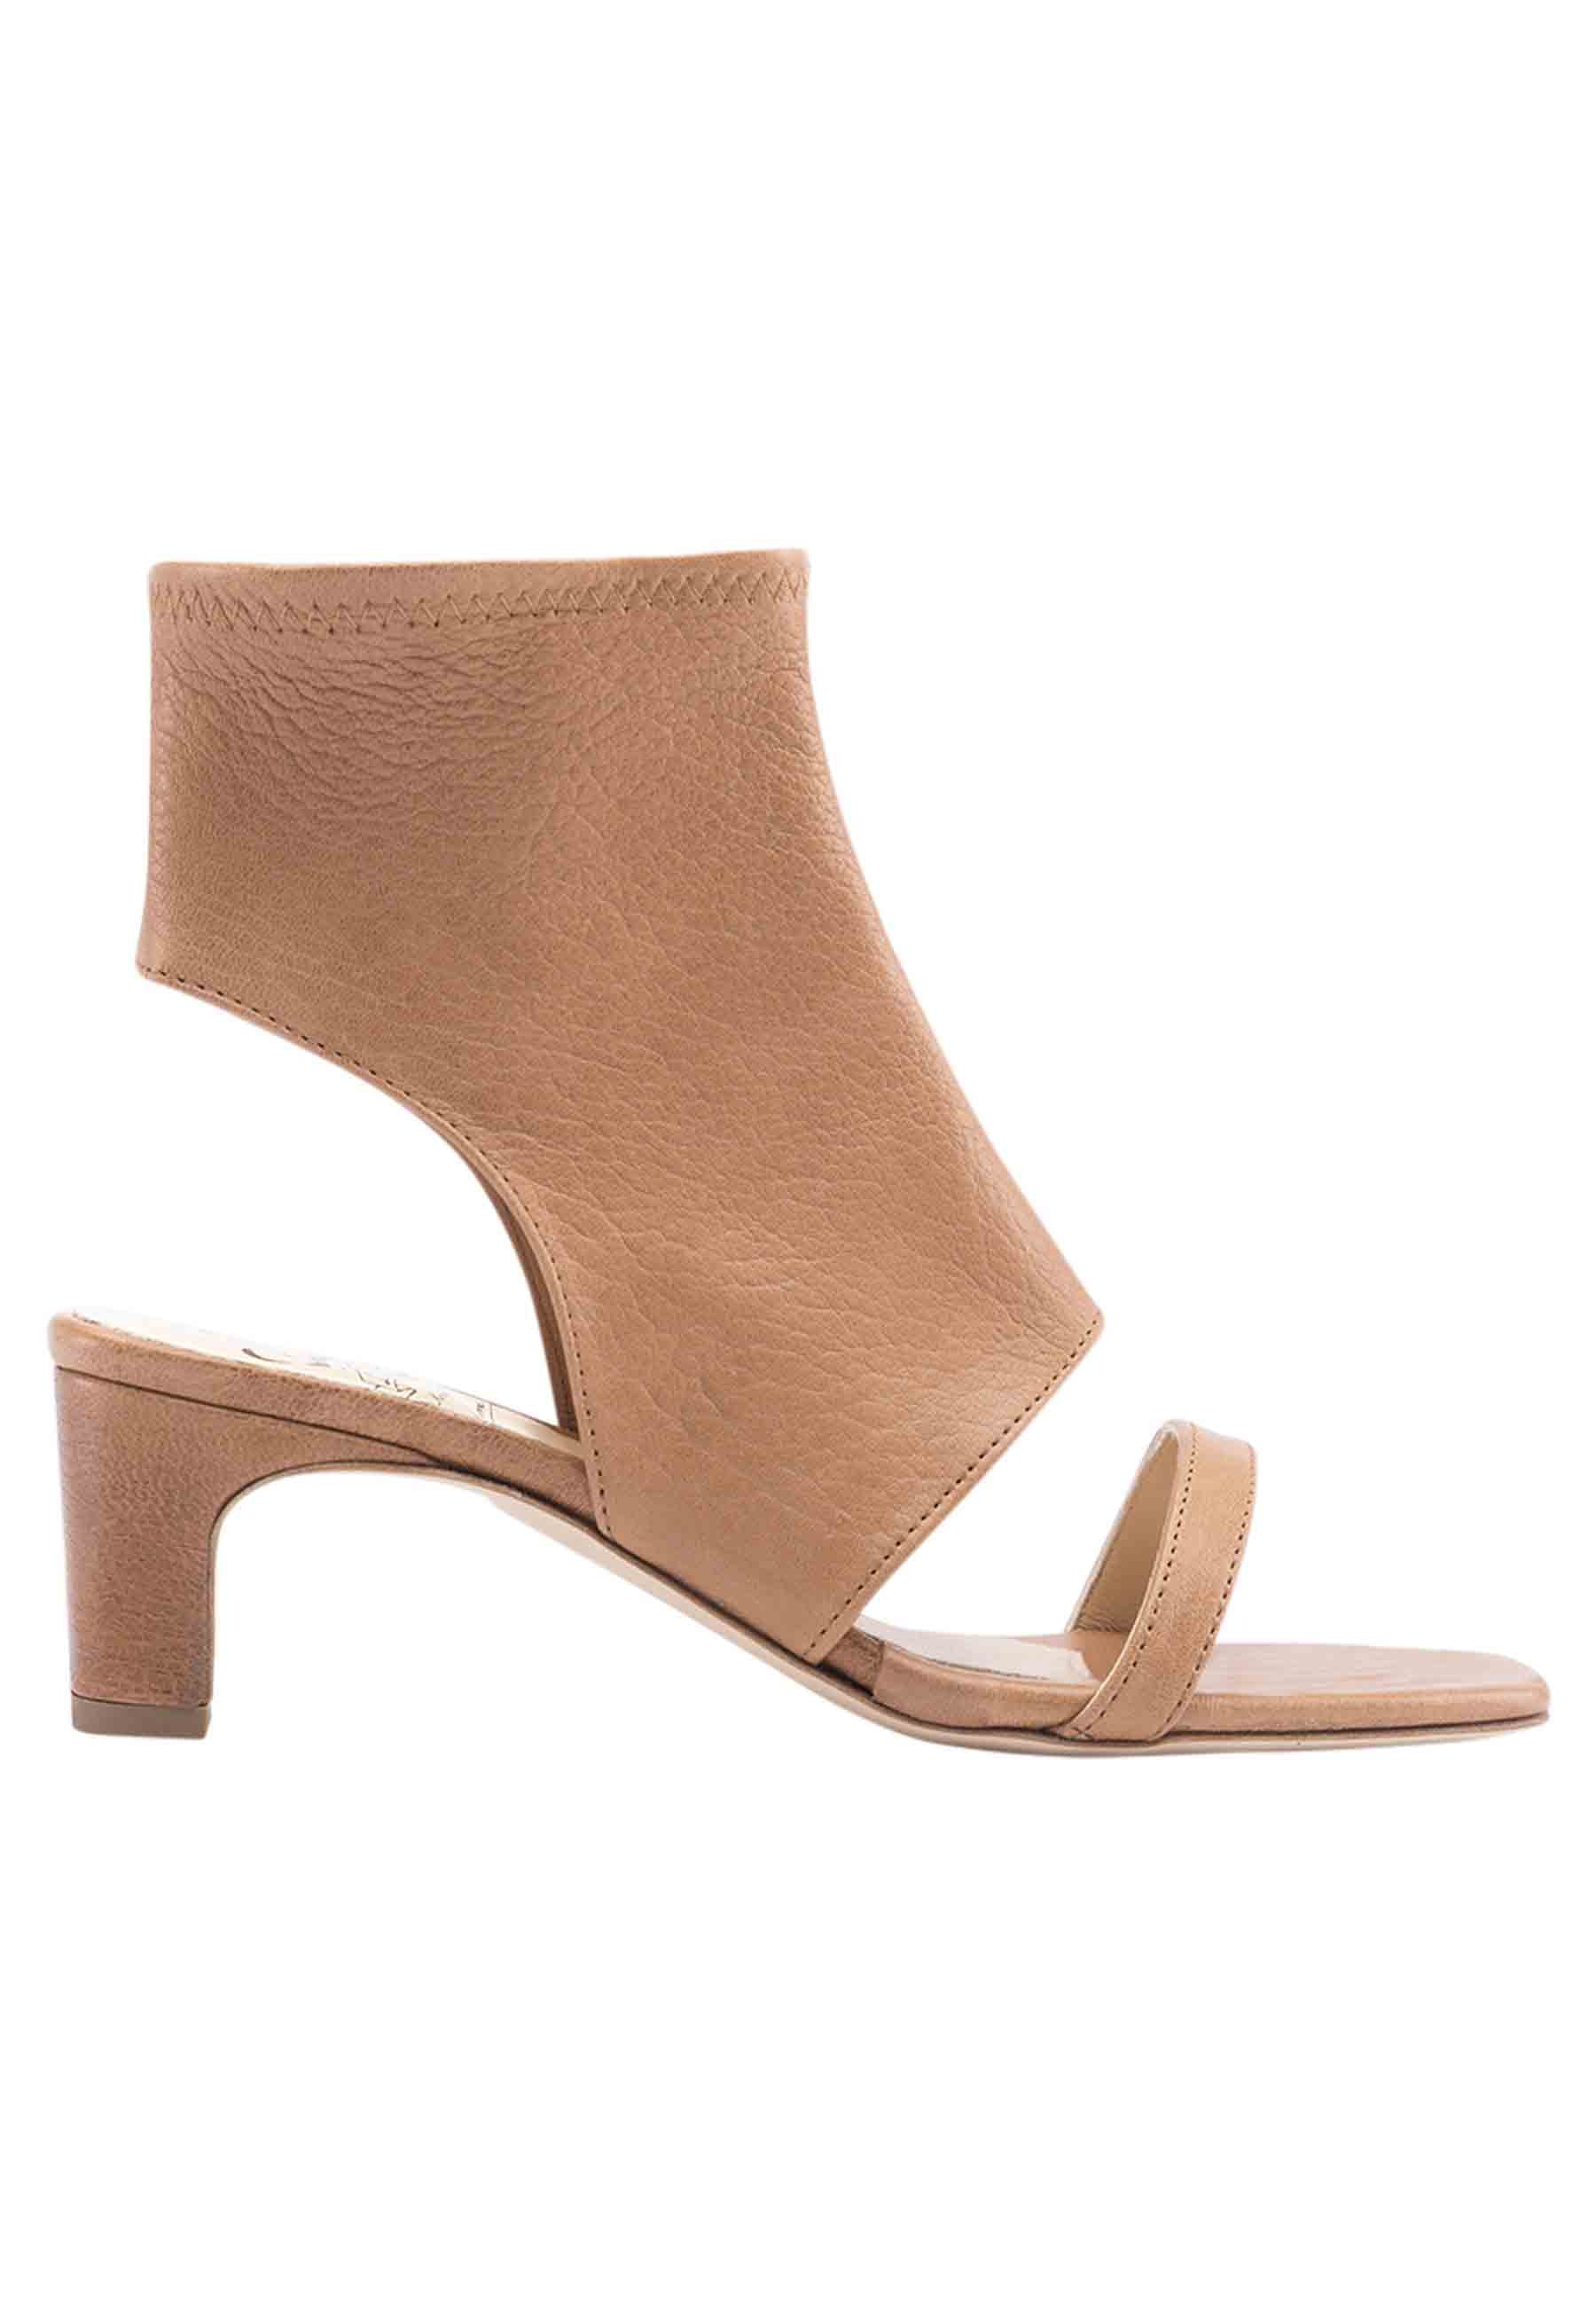 Women's sandals in tan stretch leather with medium heel and anklet